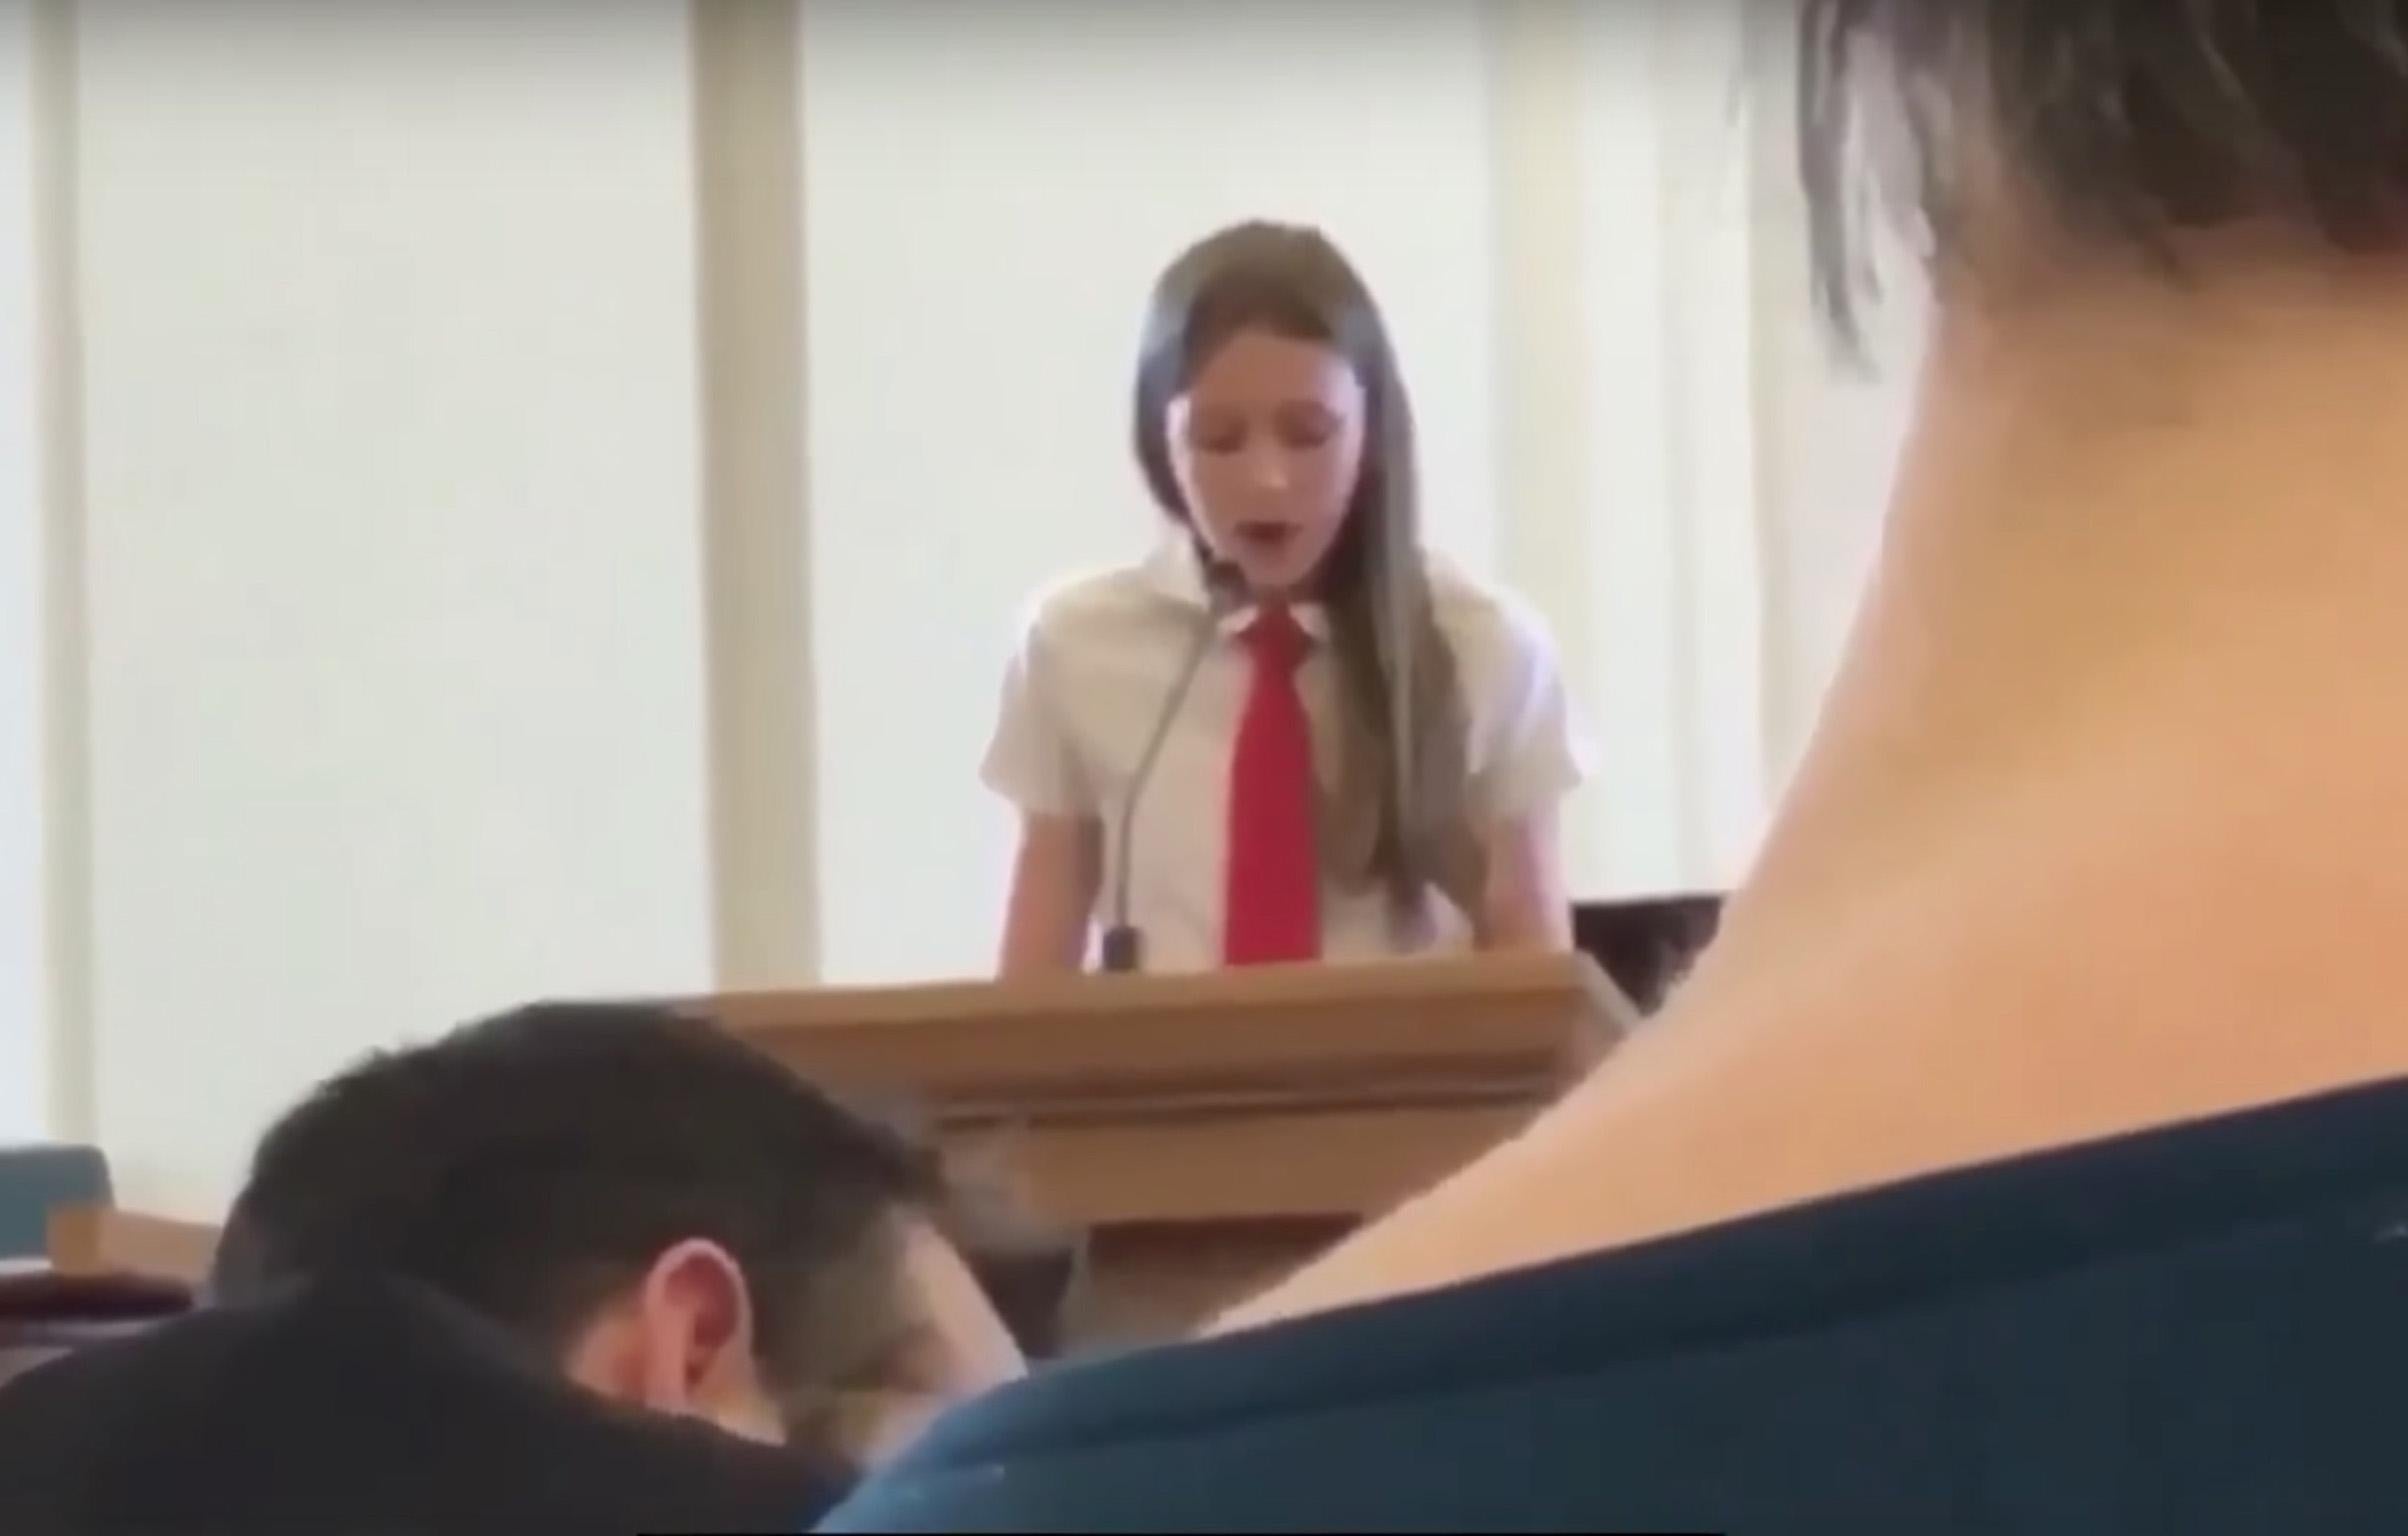 Mormon girl, 12, is stopped from speaking as she explains why she is gay to church The Independent The Independent